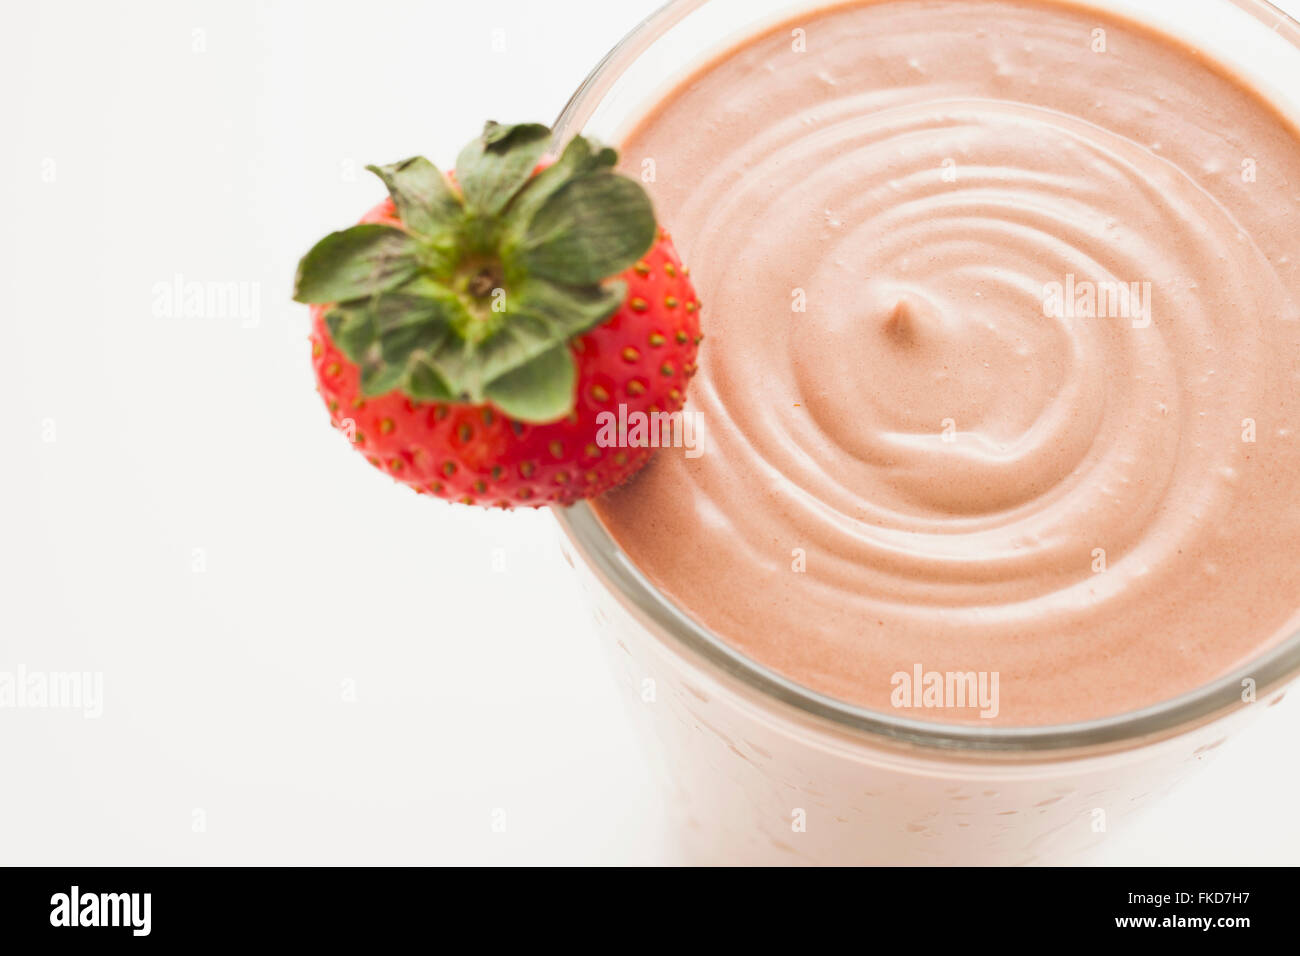 Chocolate smoothie in glass decorated with strawberry Stock Photo